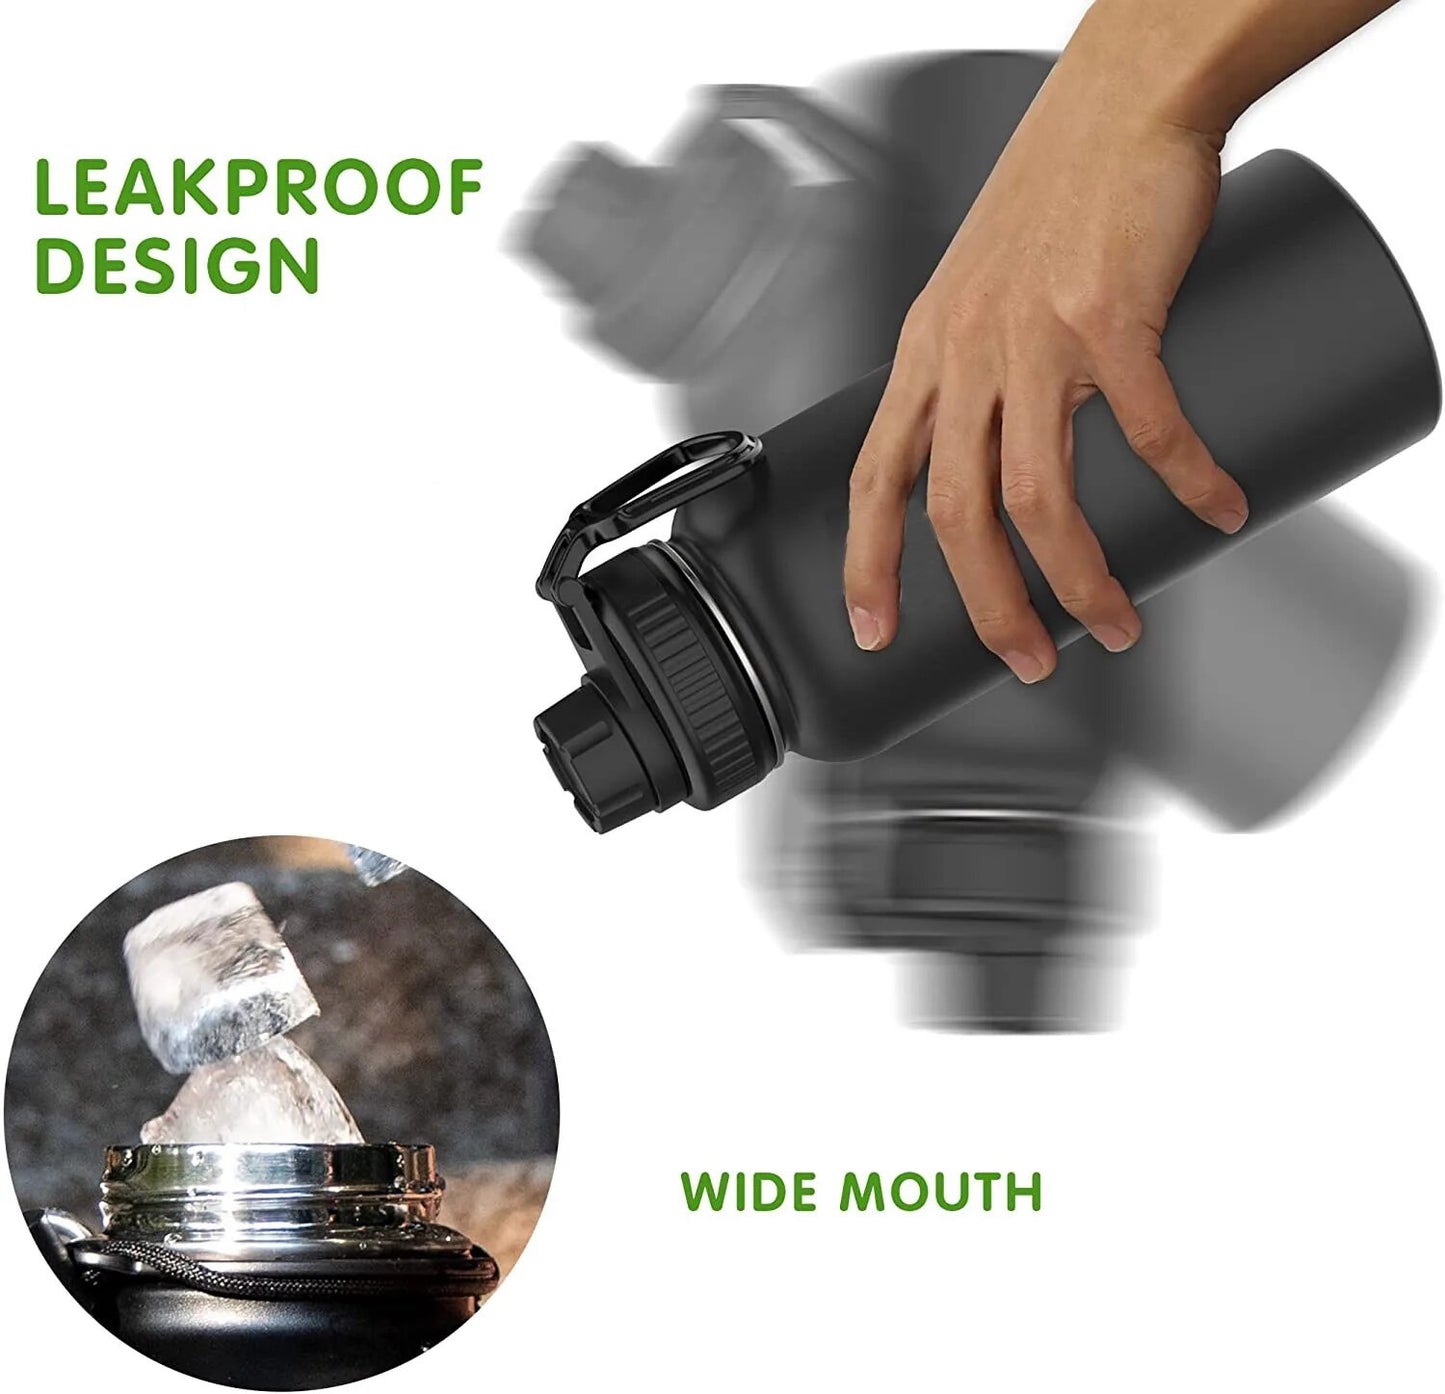 Image for 32 oz or 1000 ML stainless steel water bottle in black color with double wall vacuum insulation. The bottle has dual lid with built-in carrying handle. The image shows bottle being rotated in different angles showing it would not leak the water in any position. The image also shows the mouth of the bottle without lid giving you and idea of how wide it is to drop ice etc. into it.